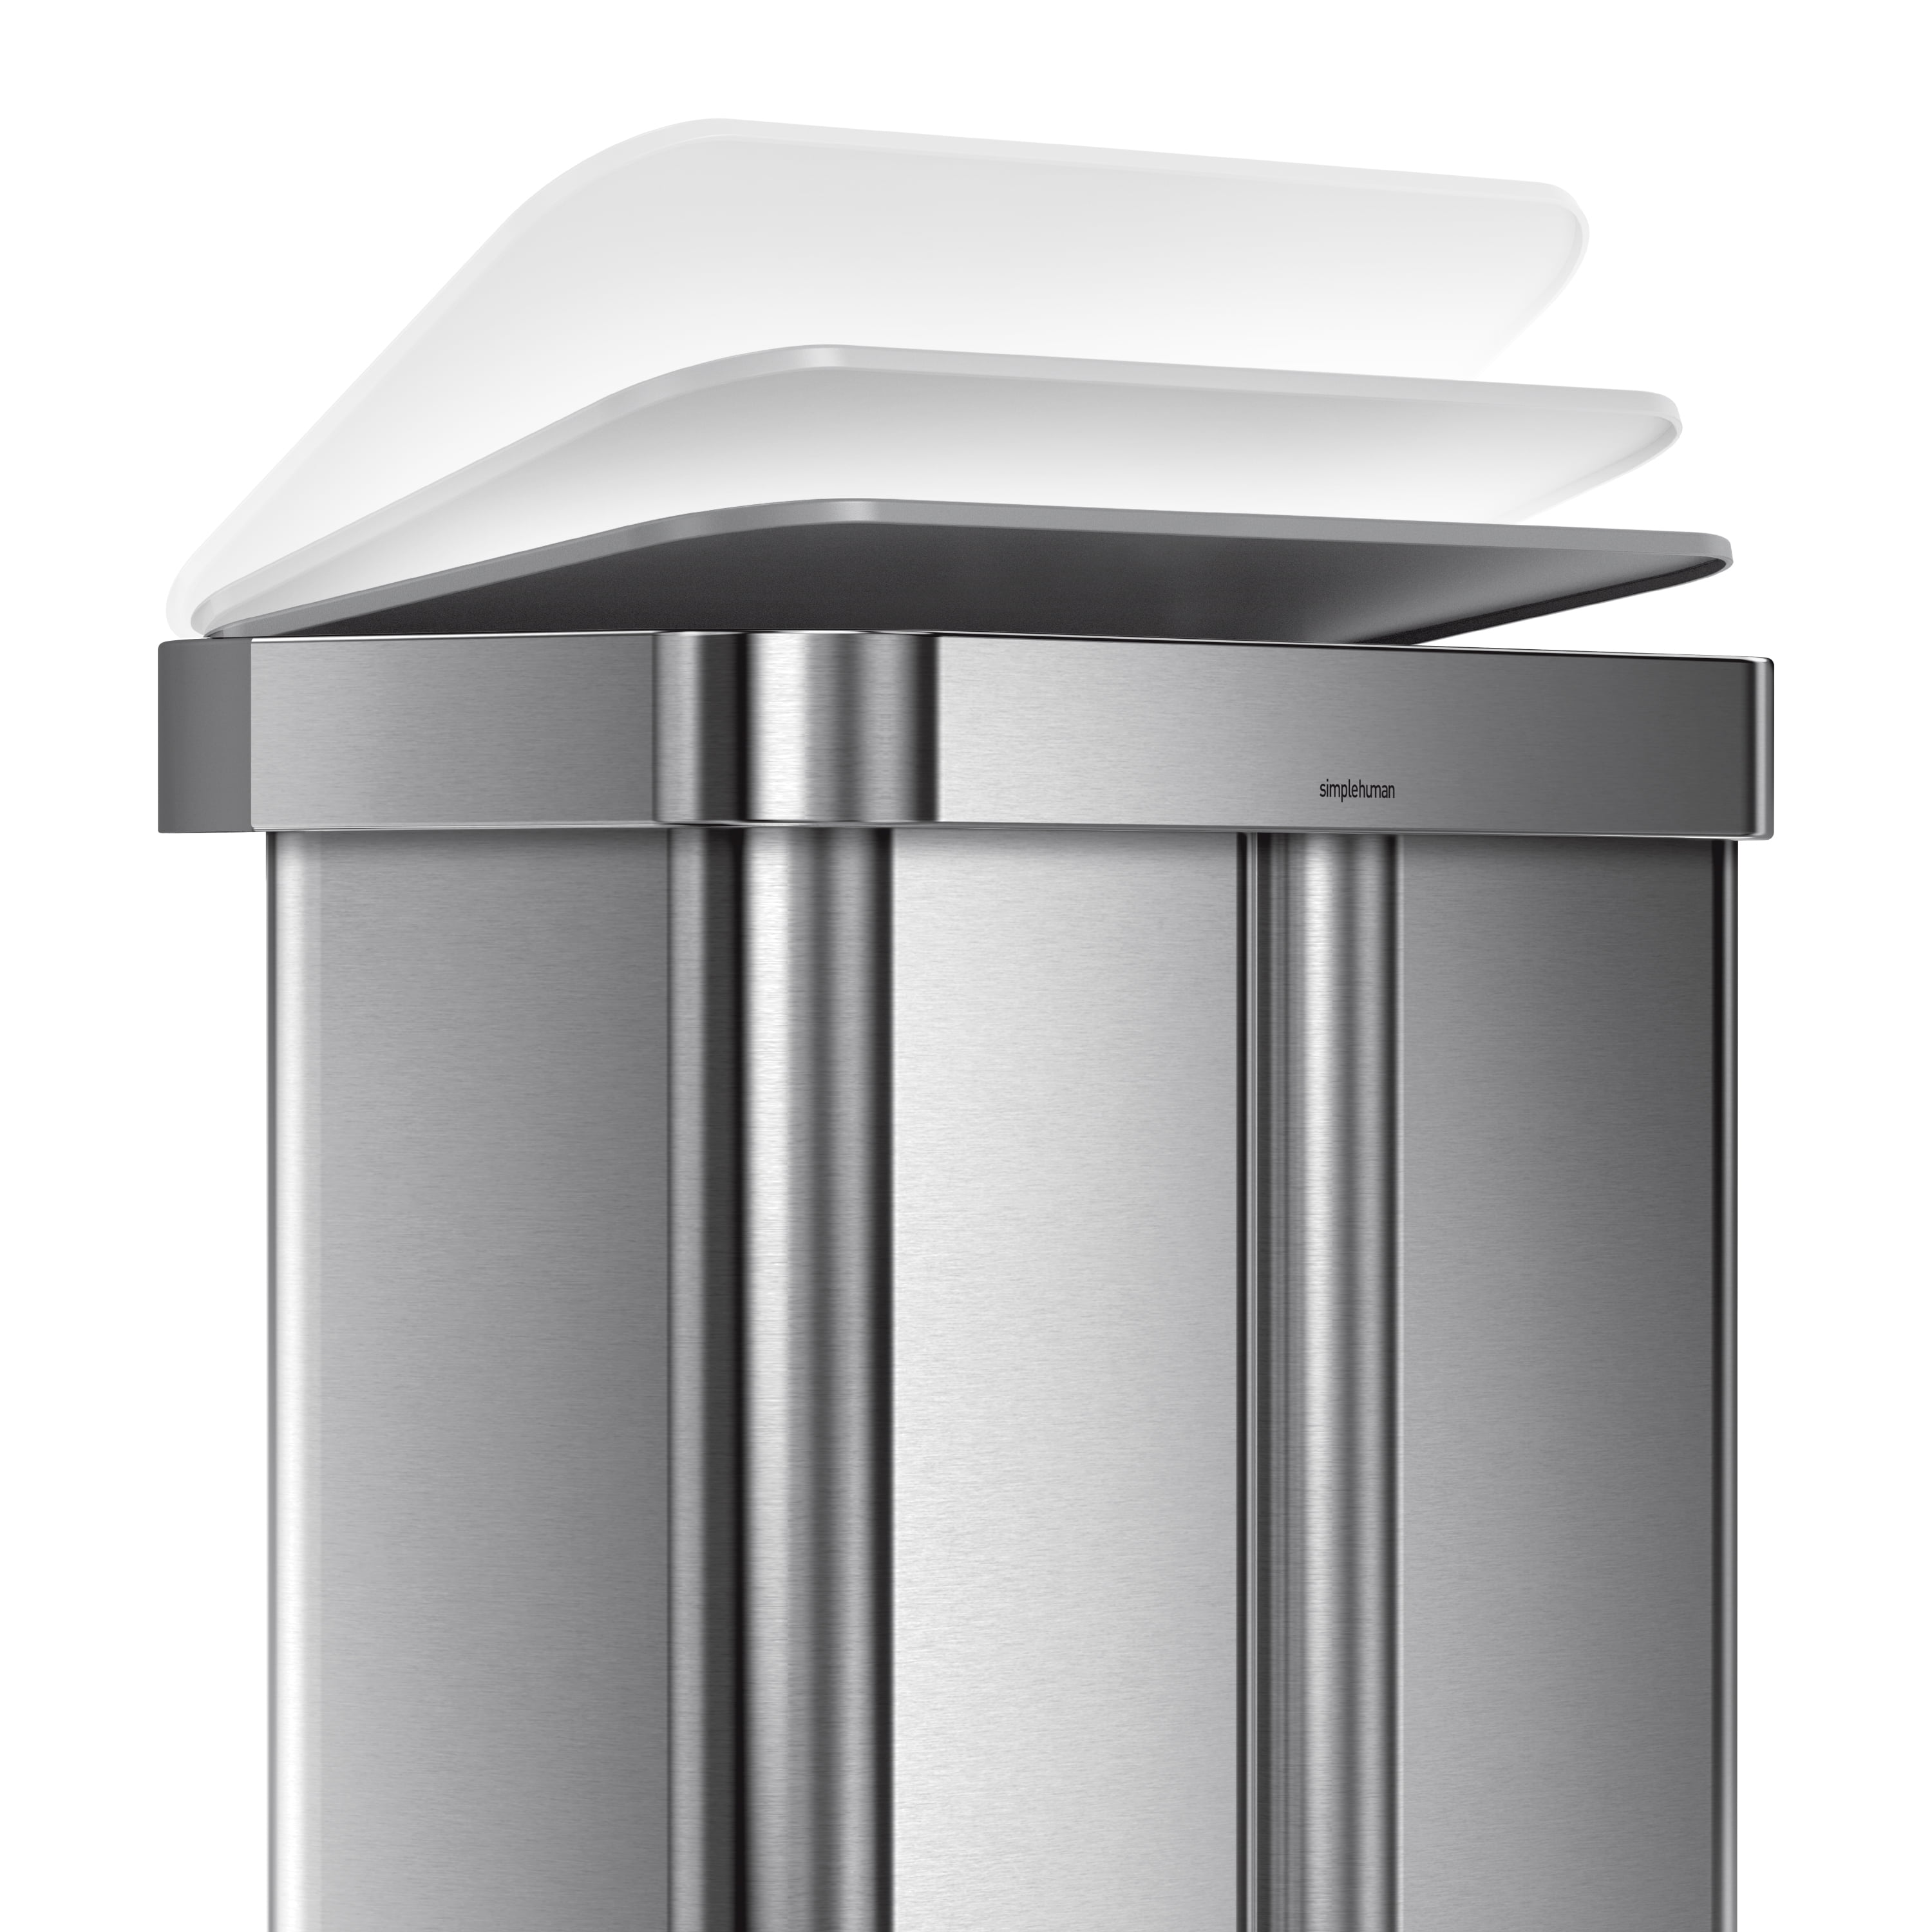 simplehuman 58 Liter / 15.3 Gallon Rectangular Hands-Free Dual Compartment  Recycling Kitchen Step Trash Can with Soft-Close Lid, Brushed Stainless